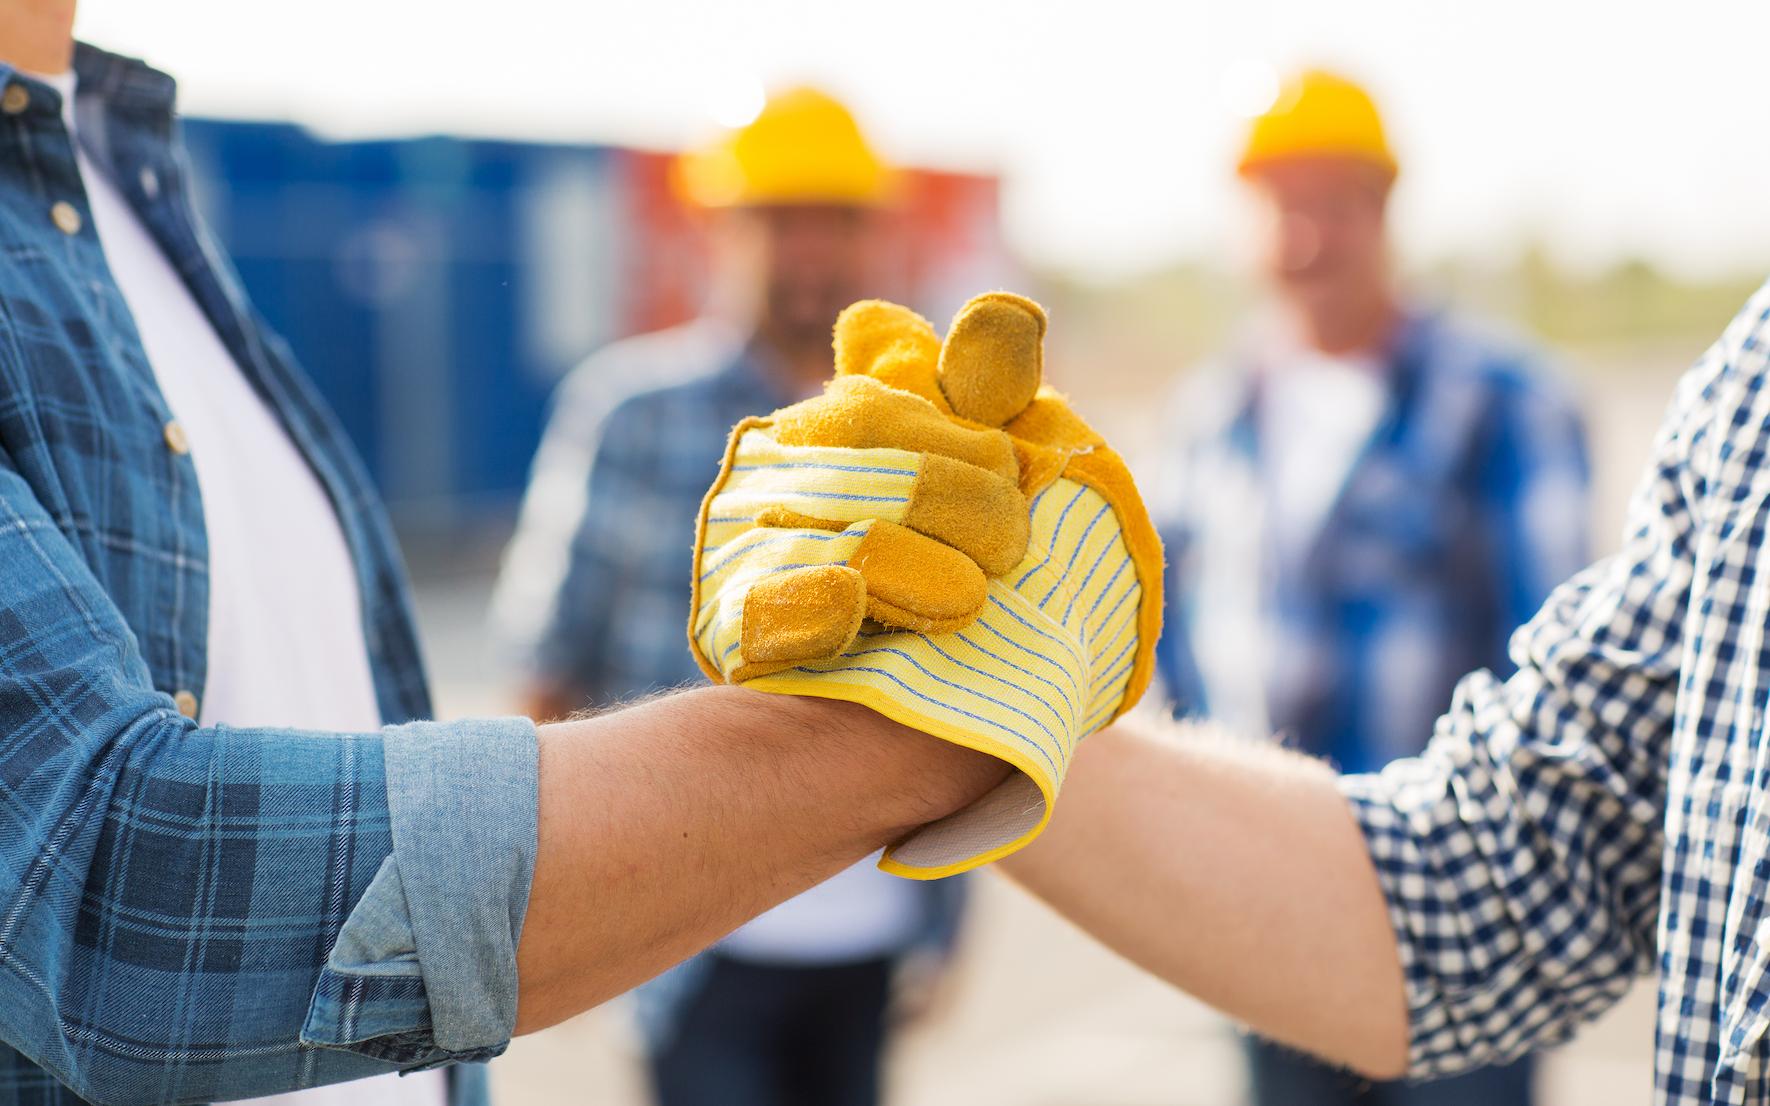 Two people wearing work gloves grip hands